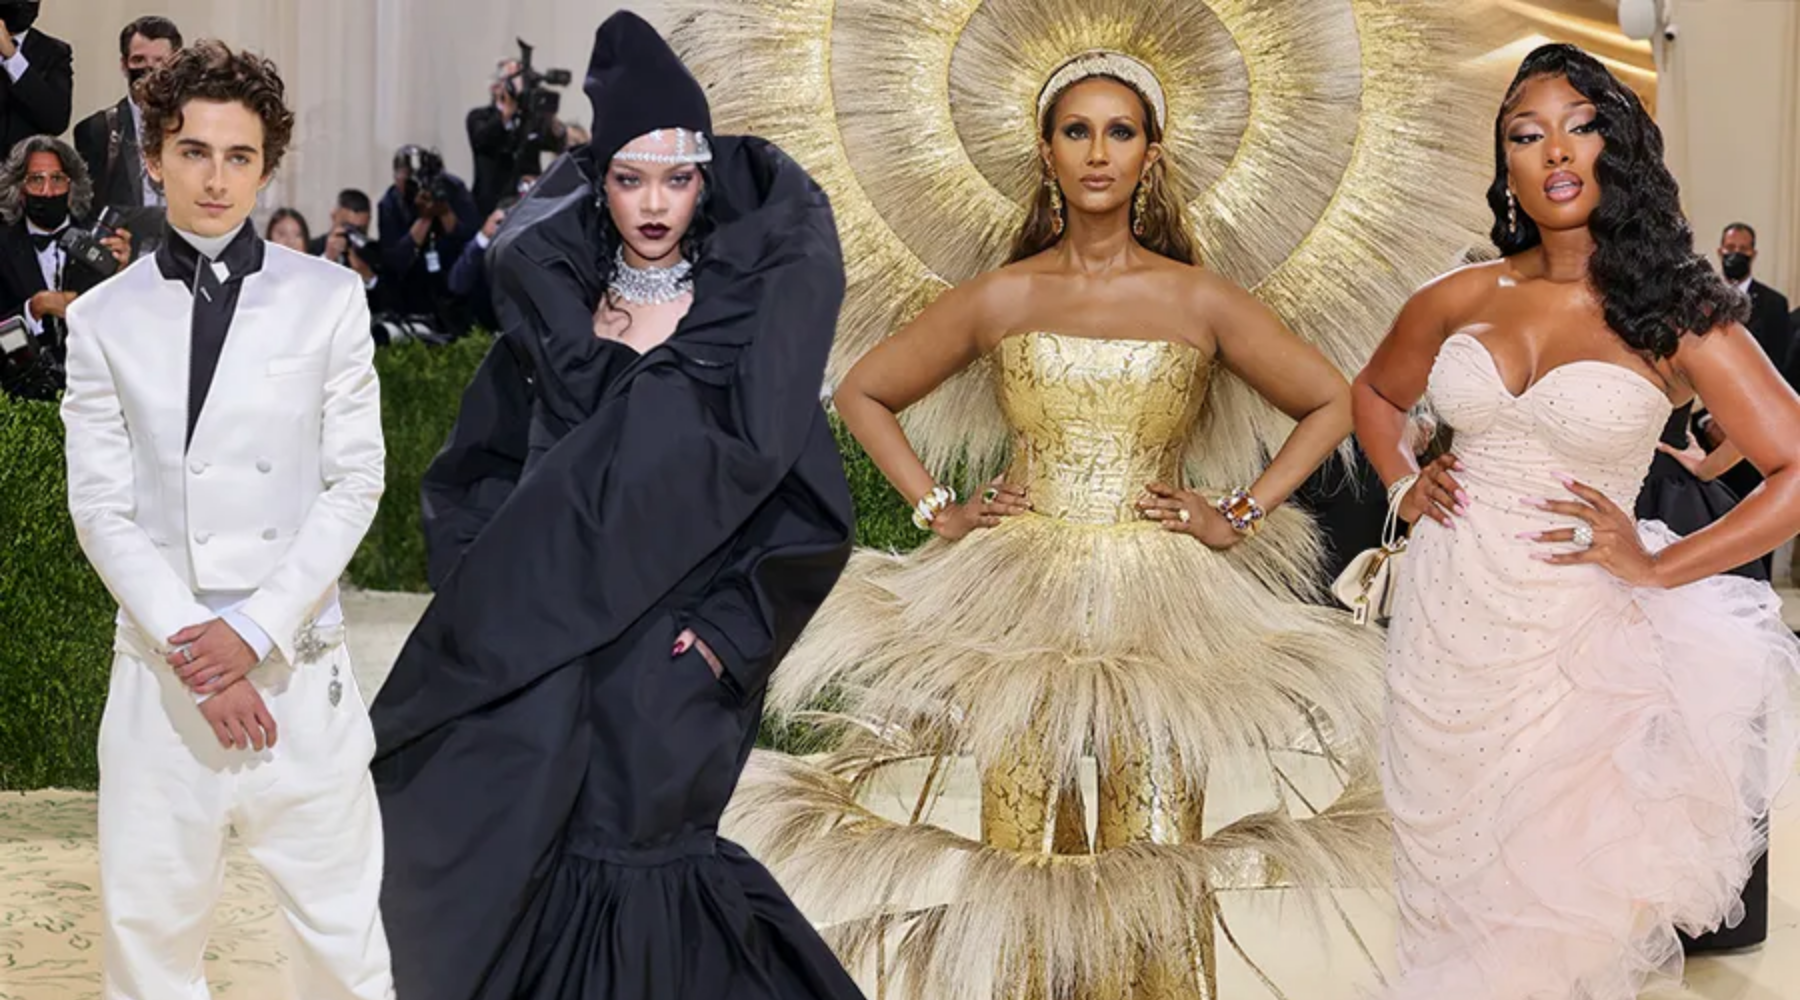 Article: The Glamour of The Met Gala 2022